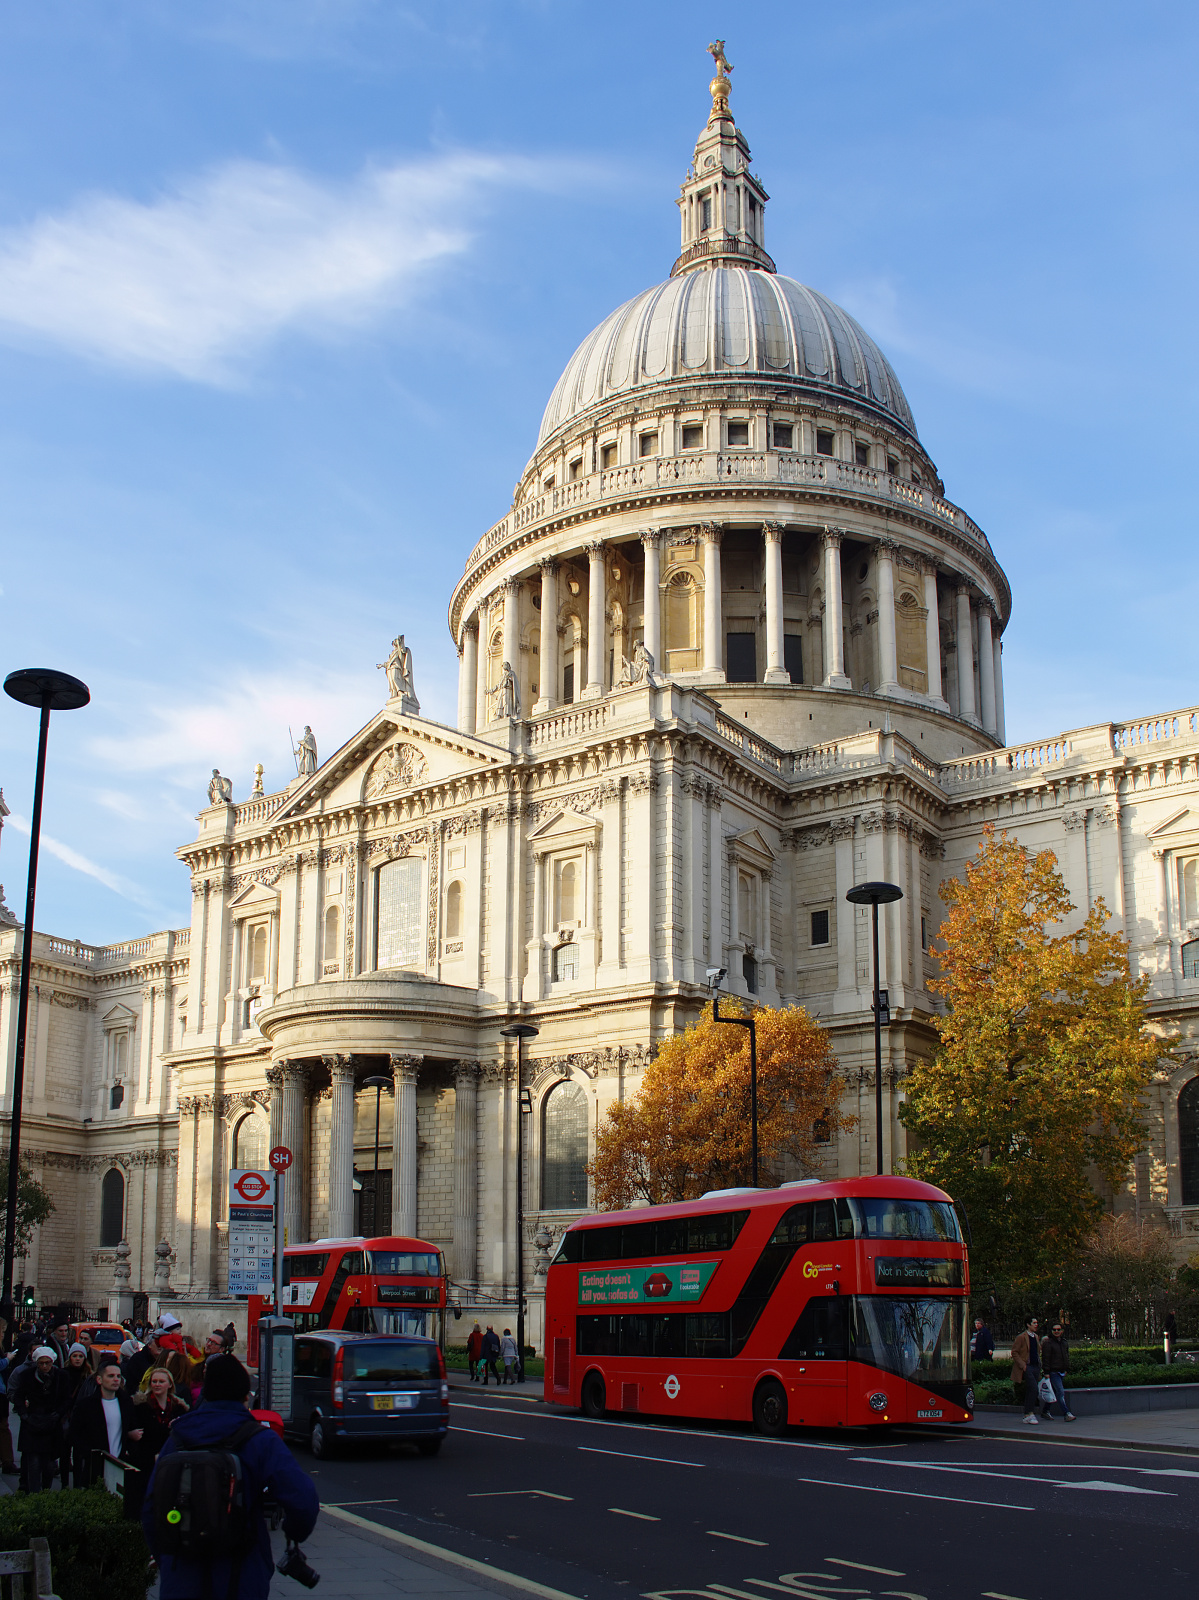 St. Paul's Cathedral (Travels » London » London at Day)